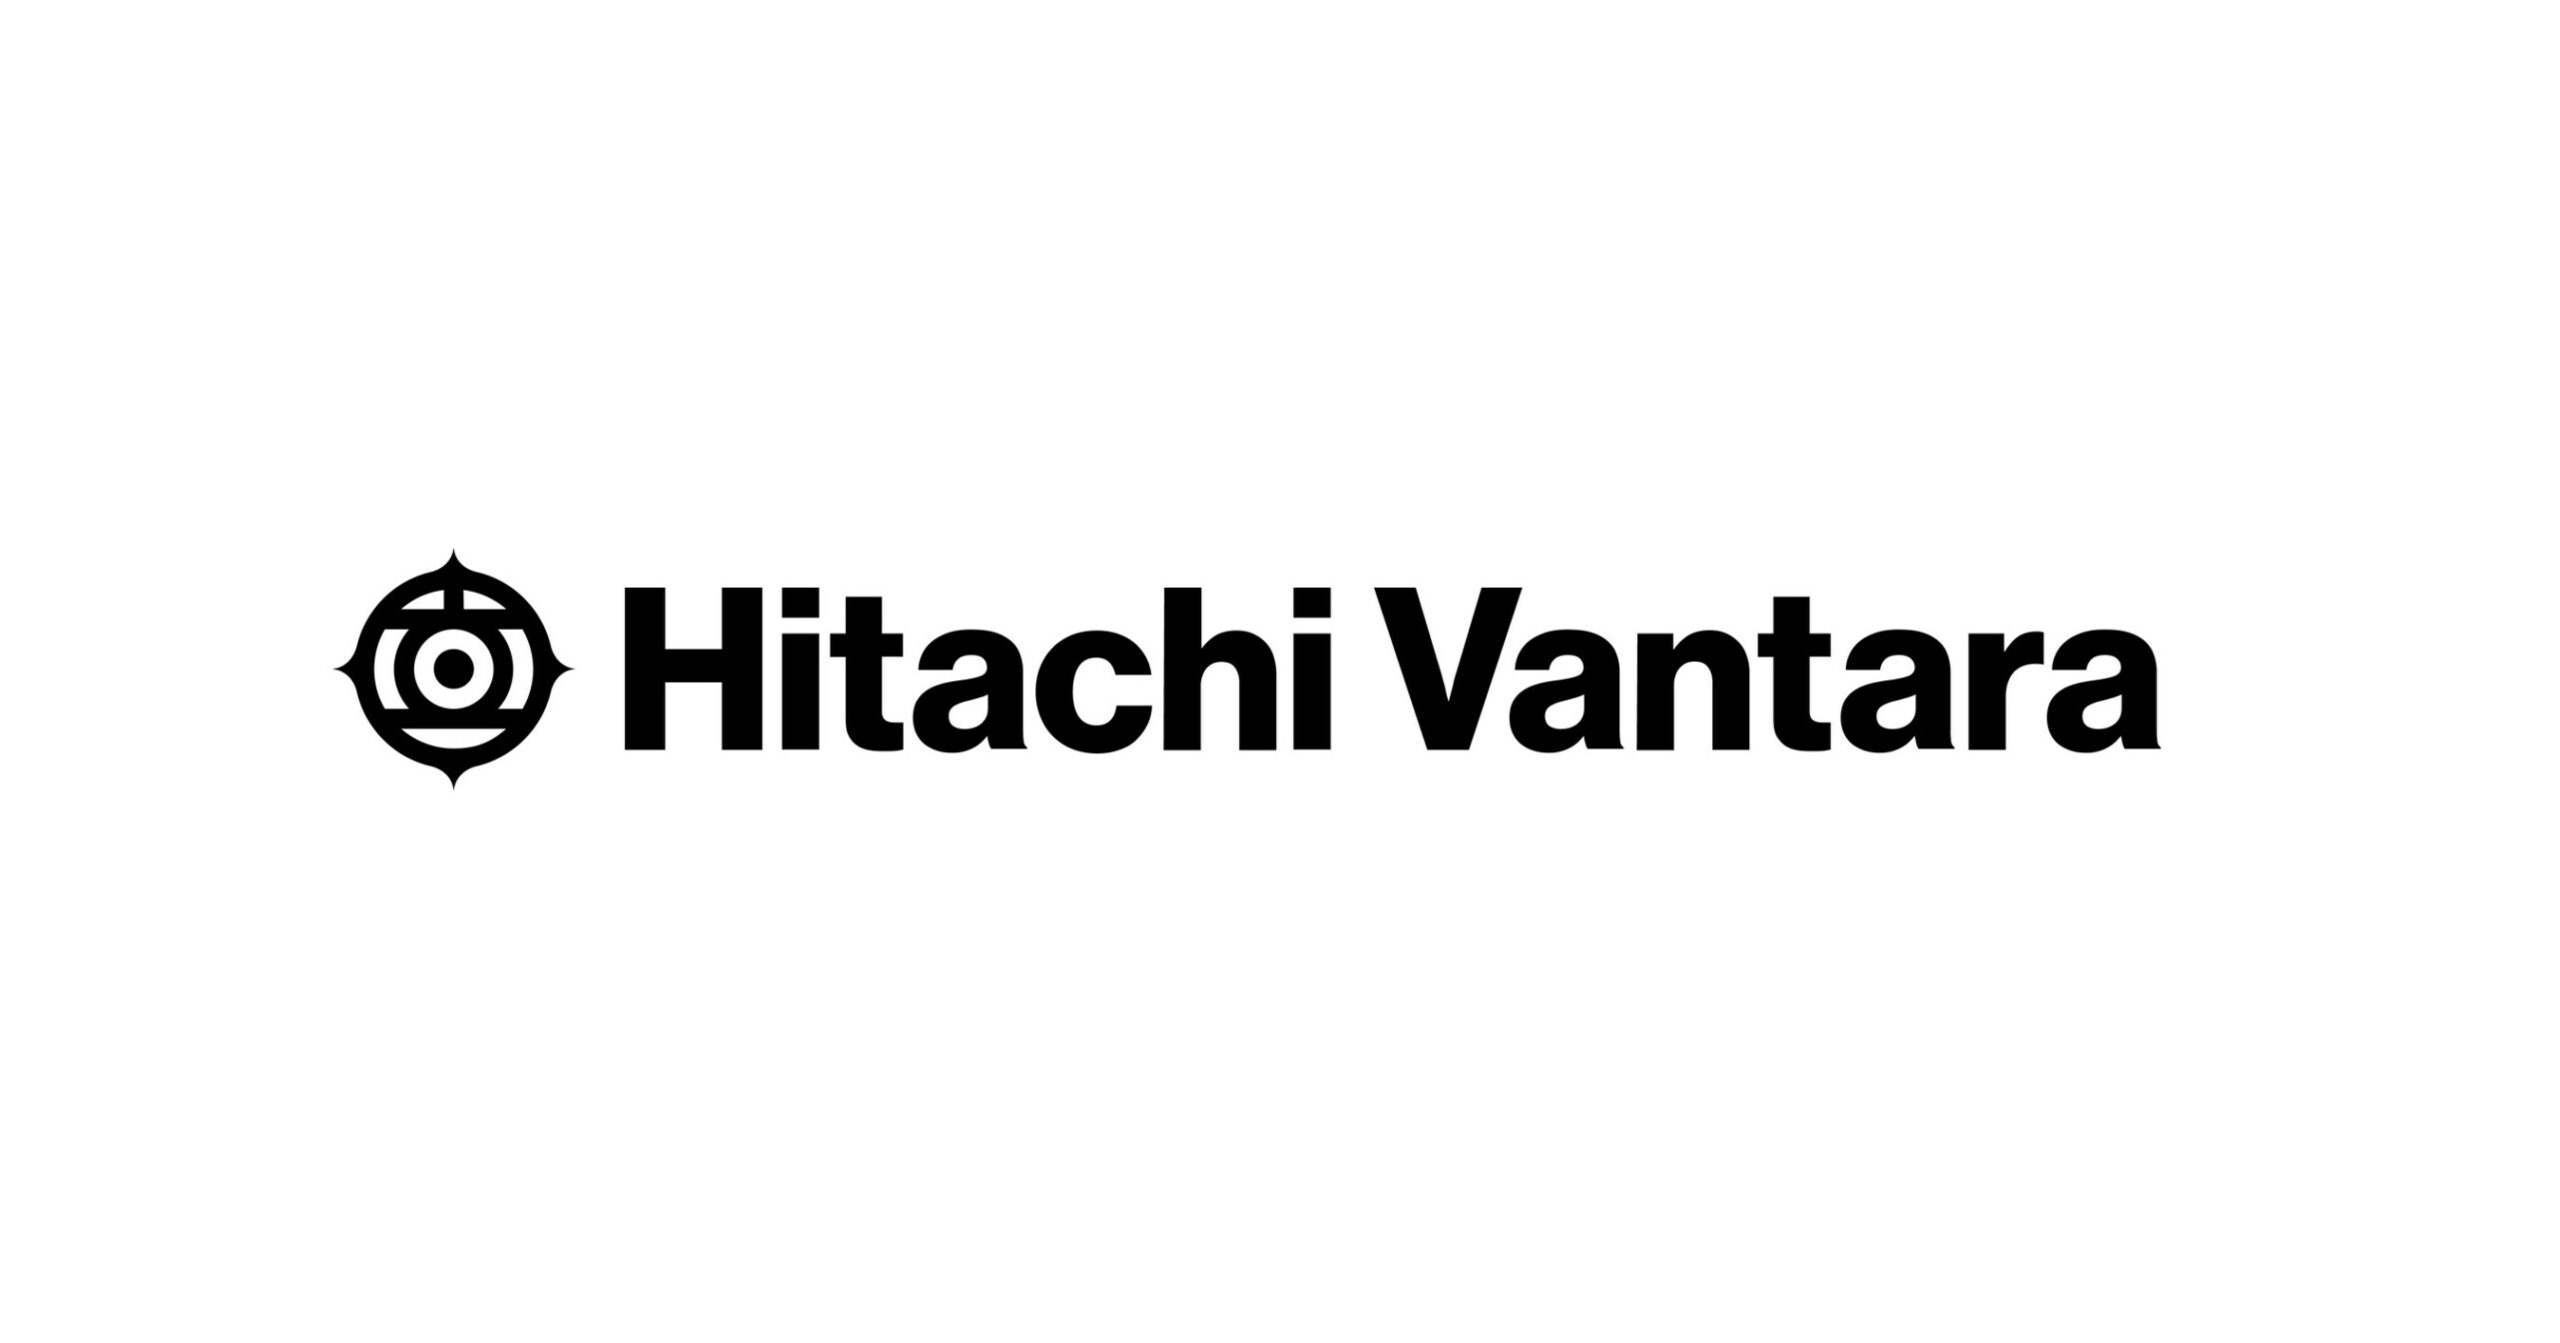 OFFSITE partners with Hitachi Vantara for our clients from our data center in Kenosha, WI